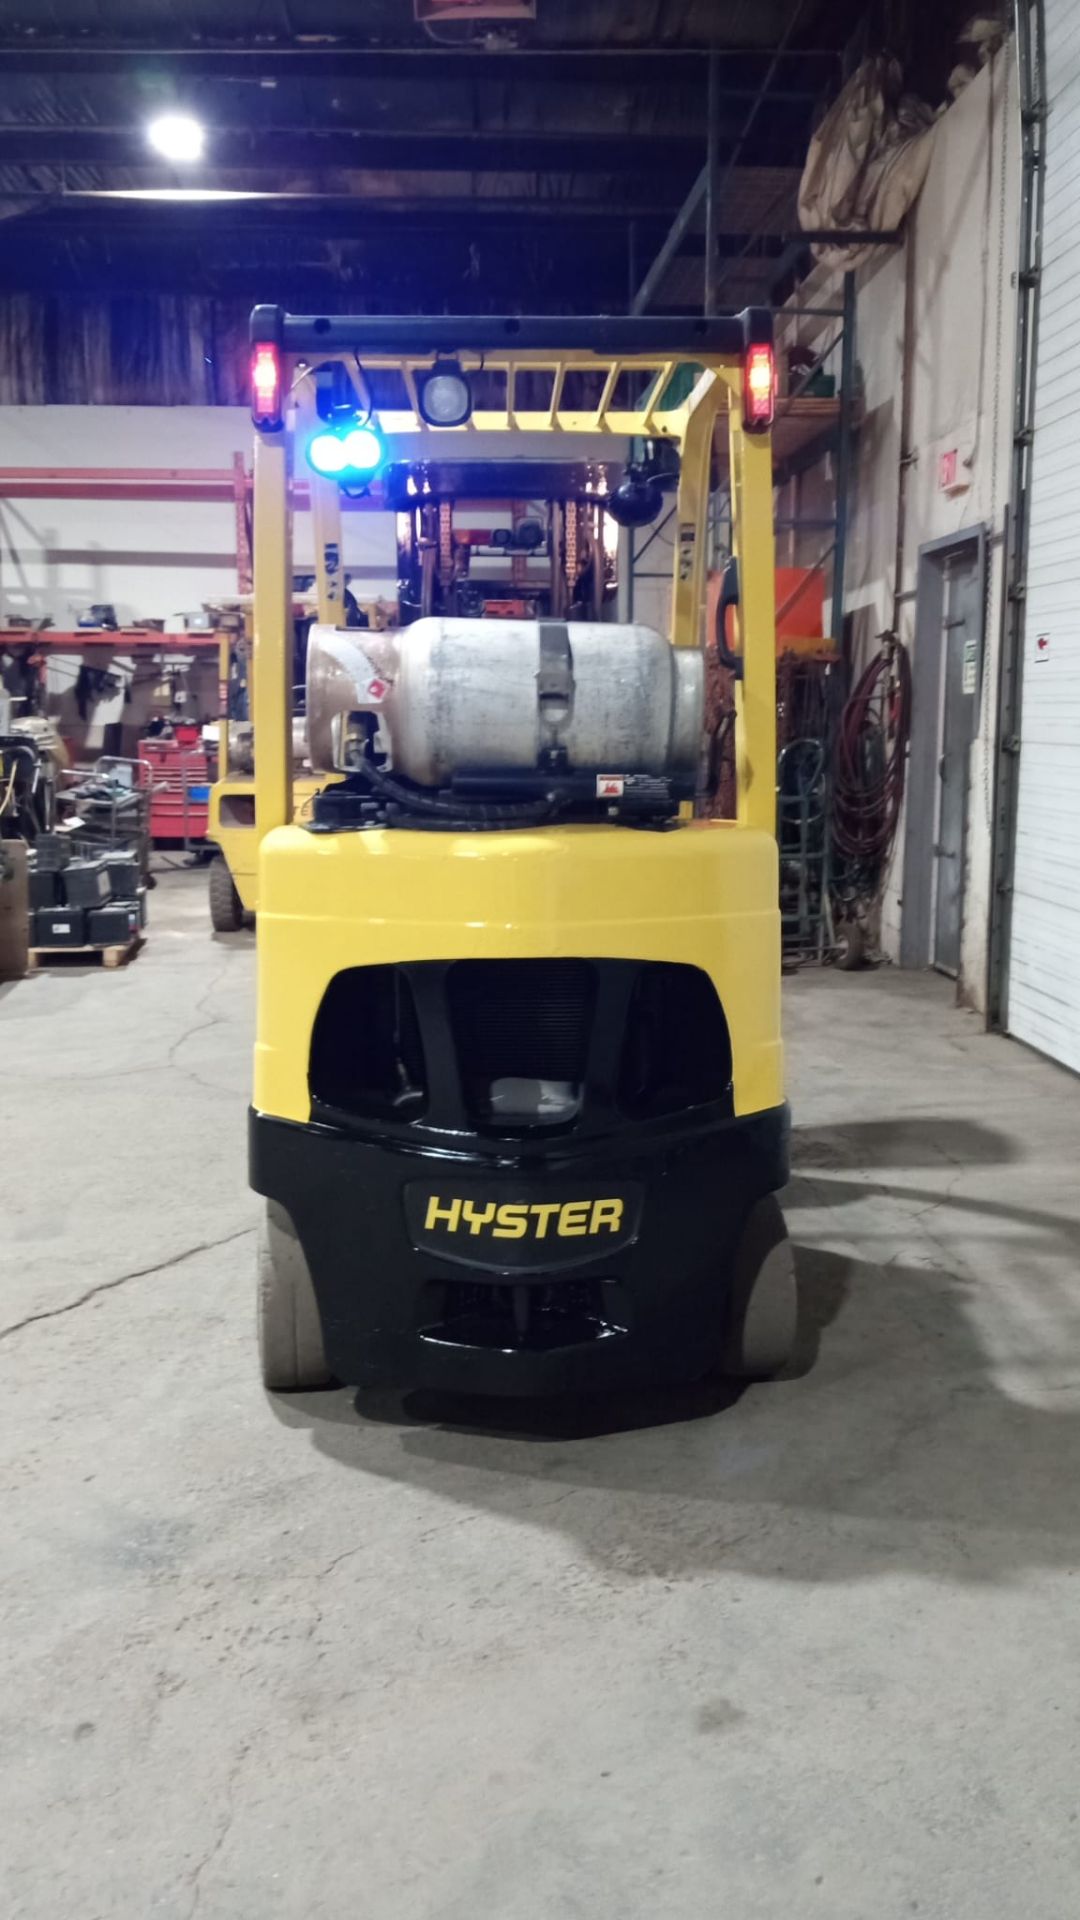 2016 HYSTER 5,000lbs Capacity LPG (Propane) Forklift with sideshift & 3-STAGE MAST & Non Marking - Image 4 of 5